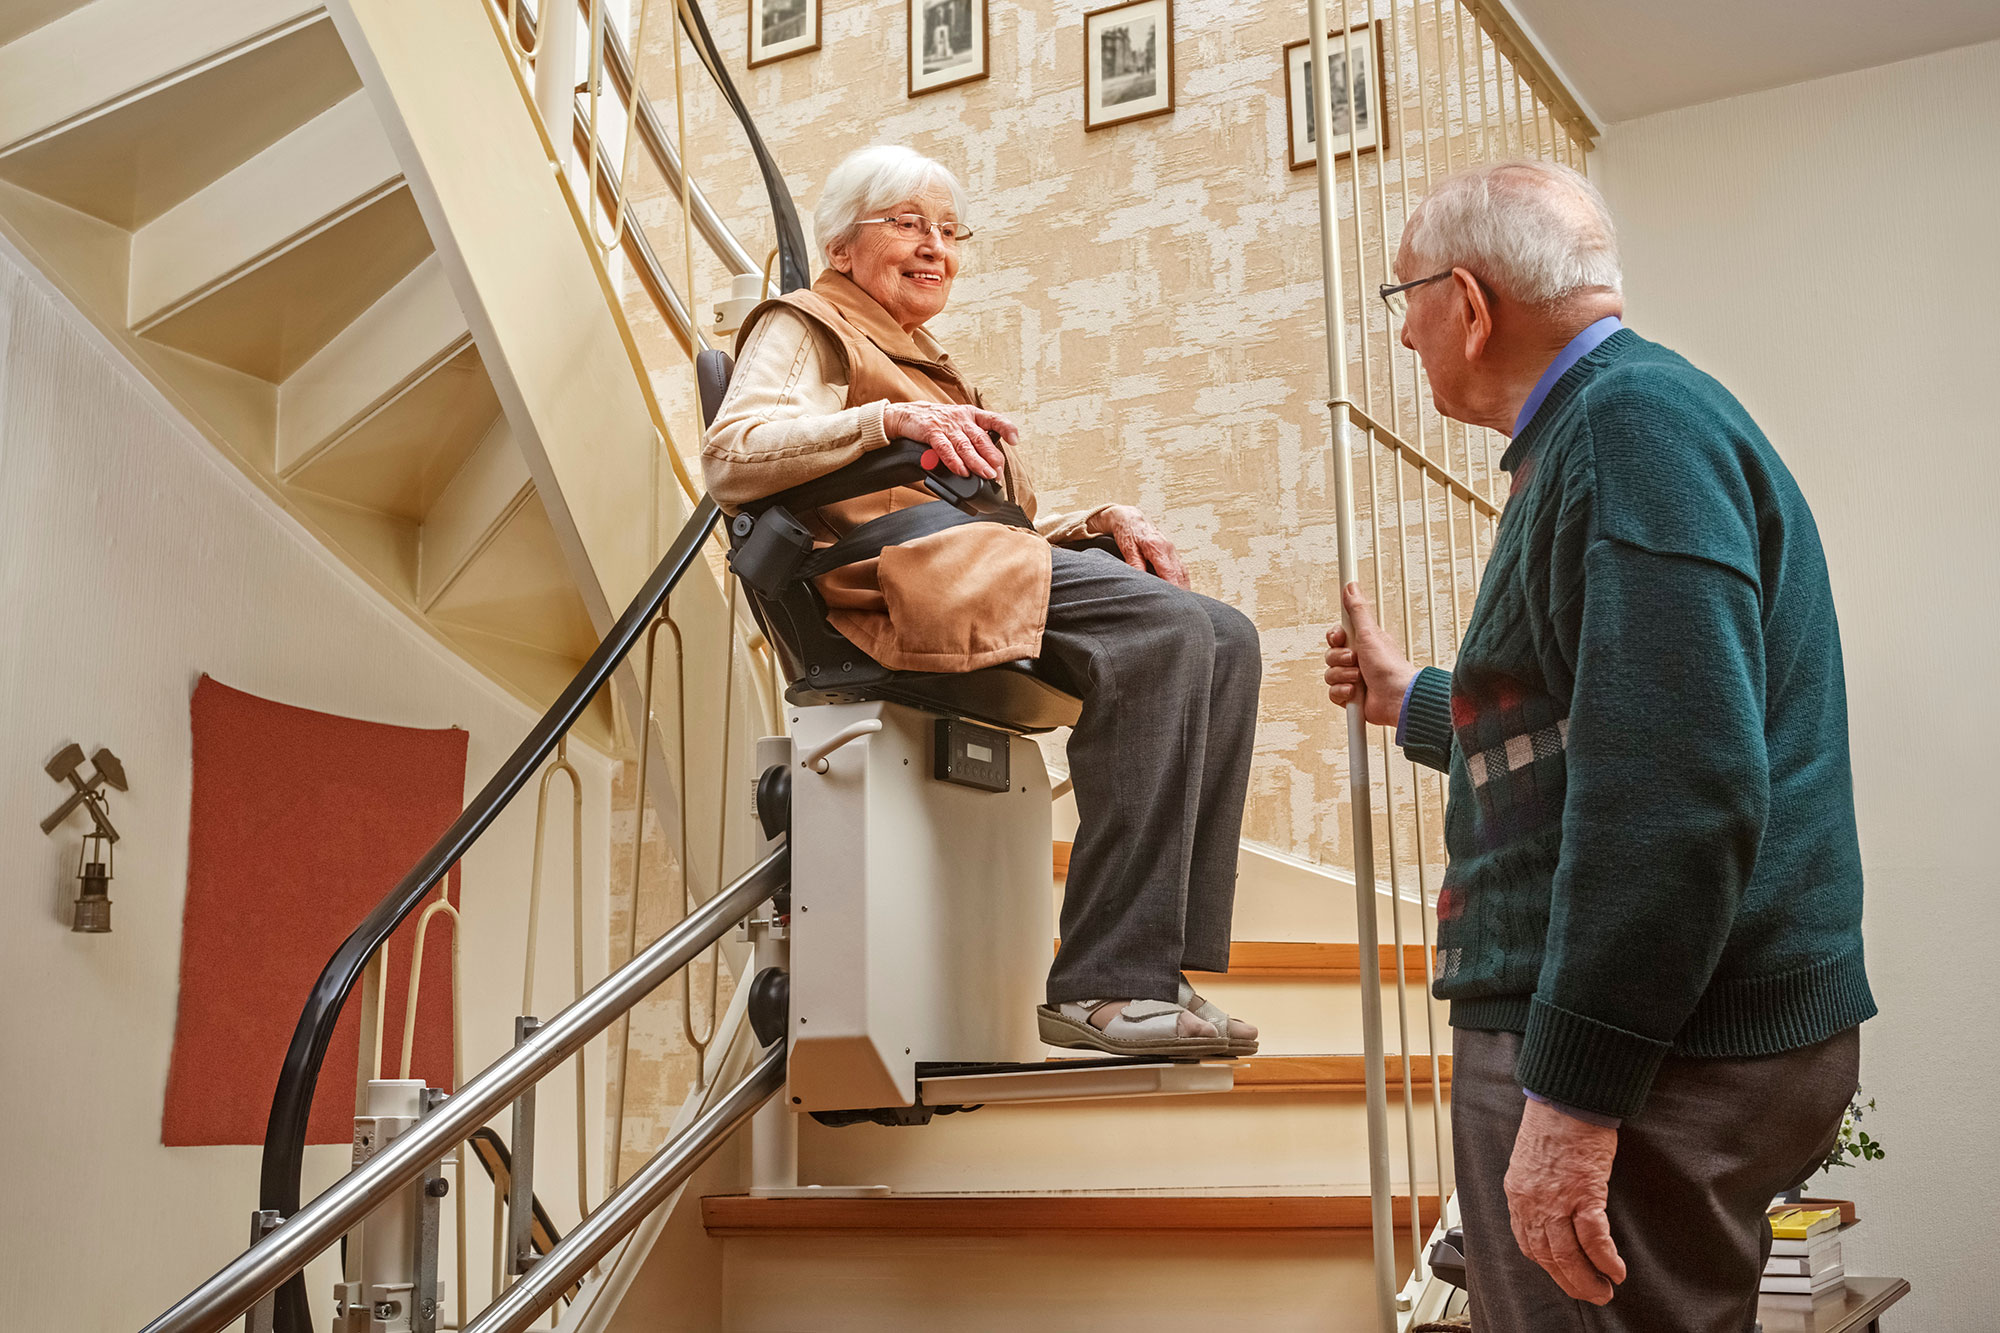 Aged care architecture and design: functionality meets aesthetics